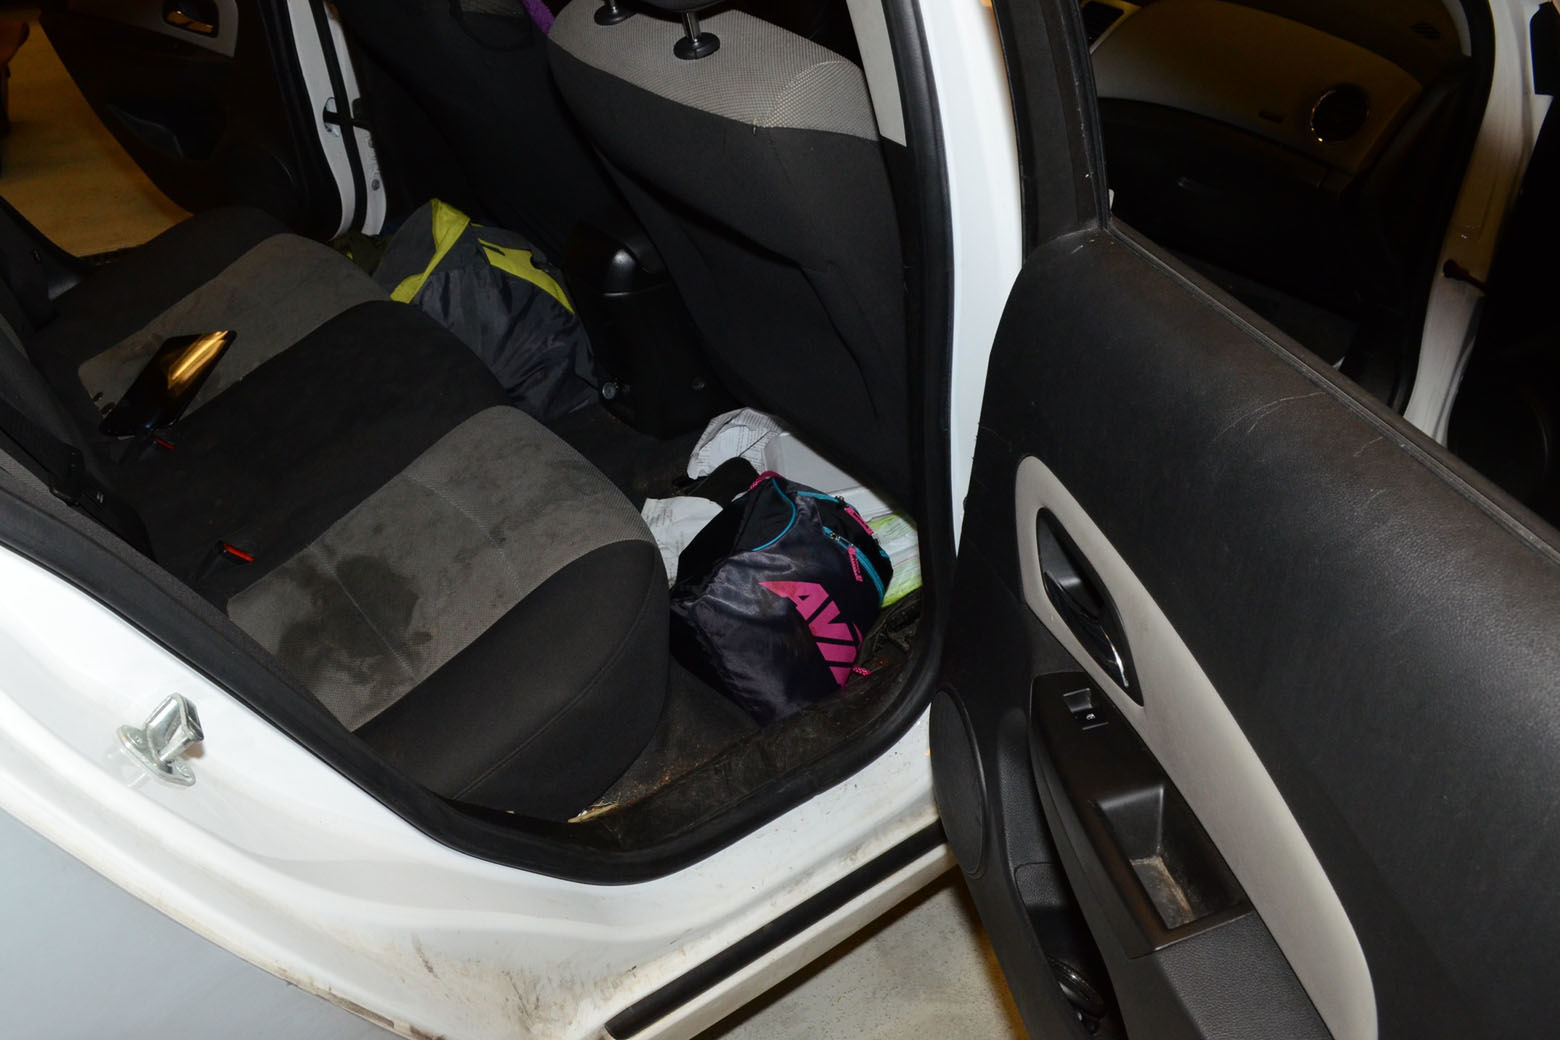 A look inside the Chevy Cruze where Daron Wint was riding when he was arrested. The black and pink drawstring backpack was Daron's.